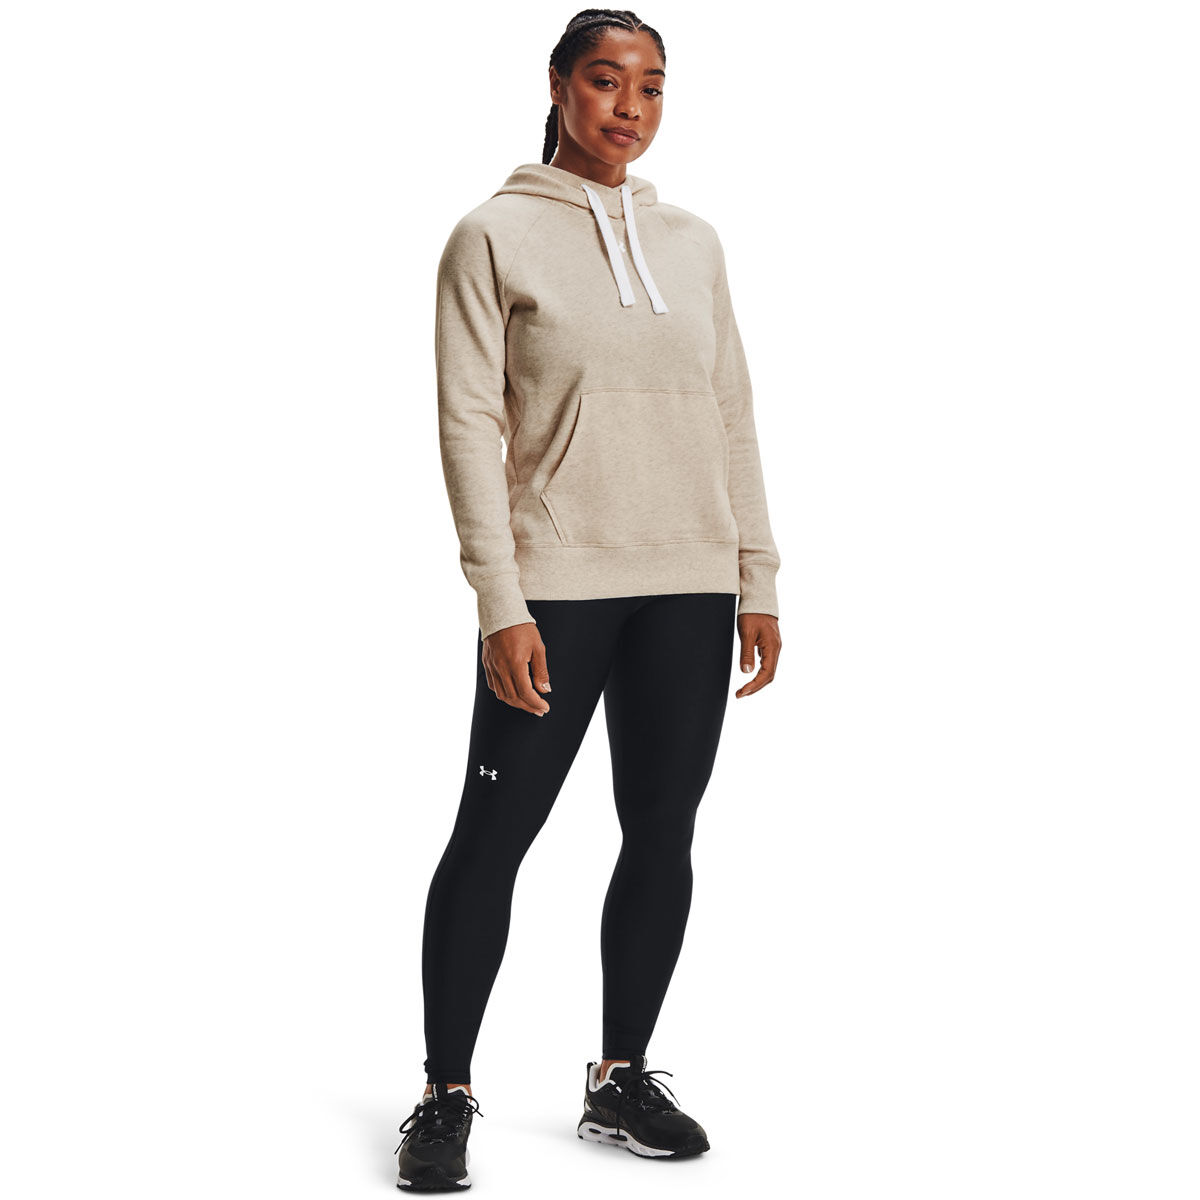 Boston University Under Armour Women's All Day Pullover Hoodie - White